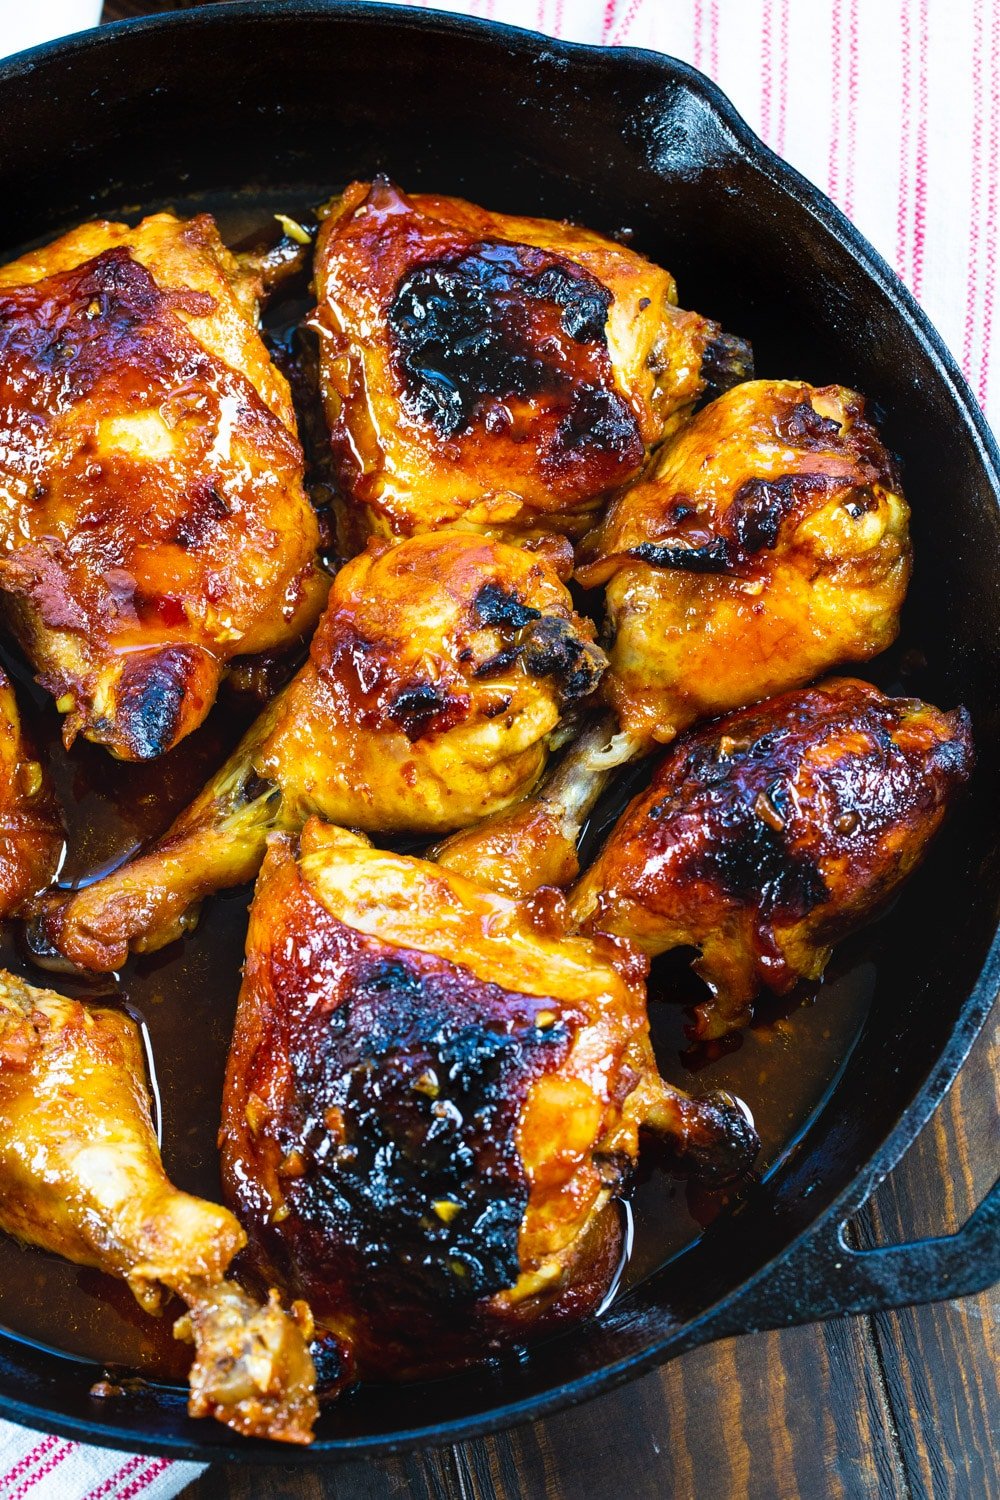 Cooked chicken in a cast iron pan.